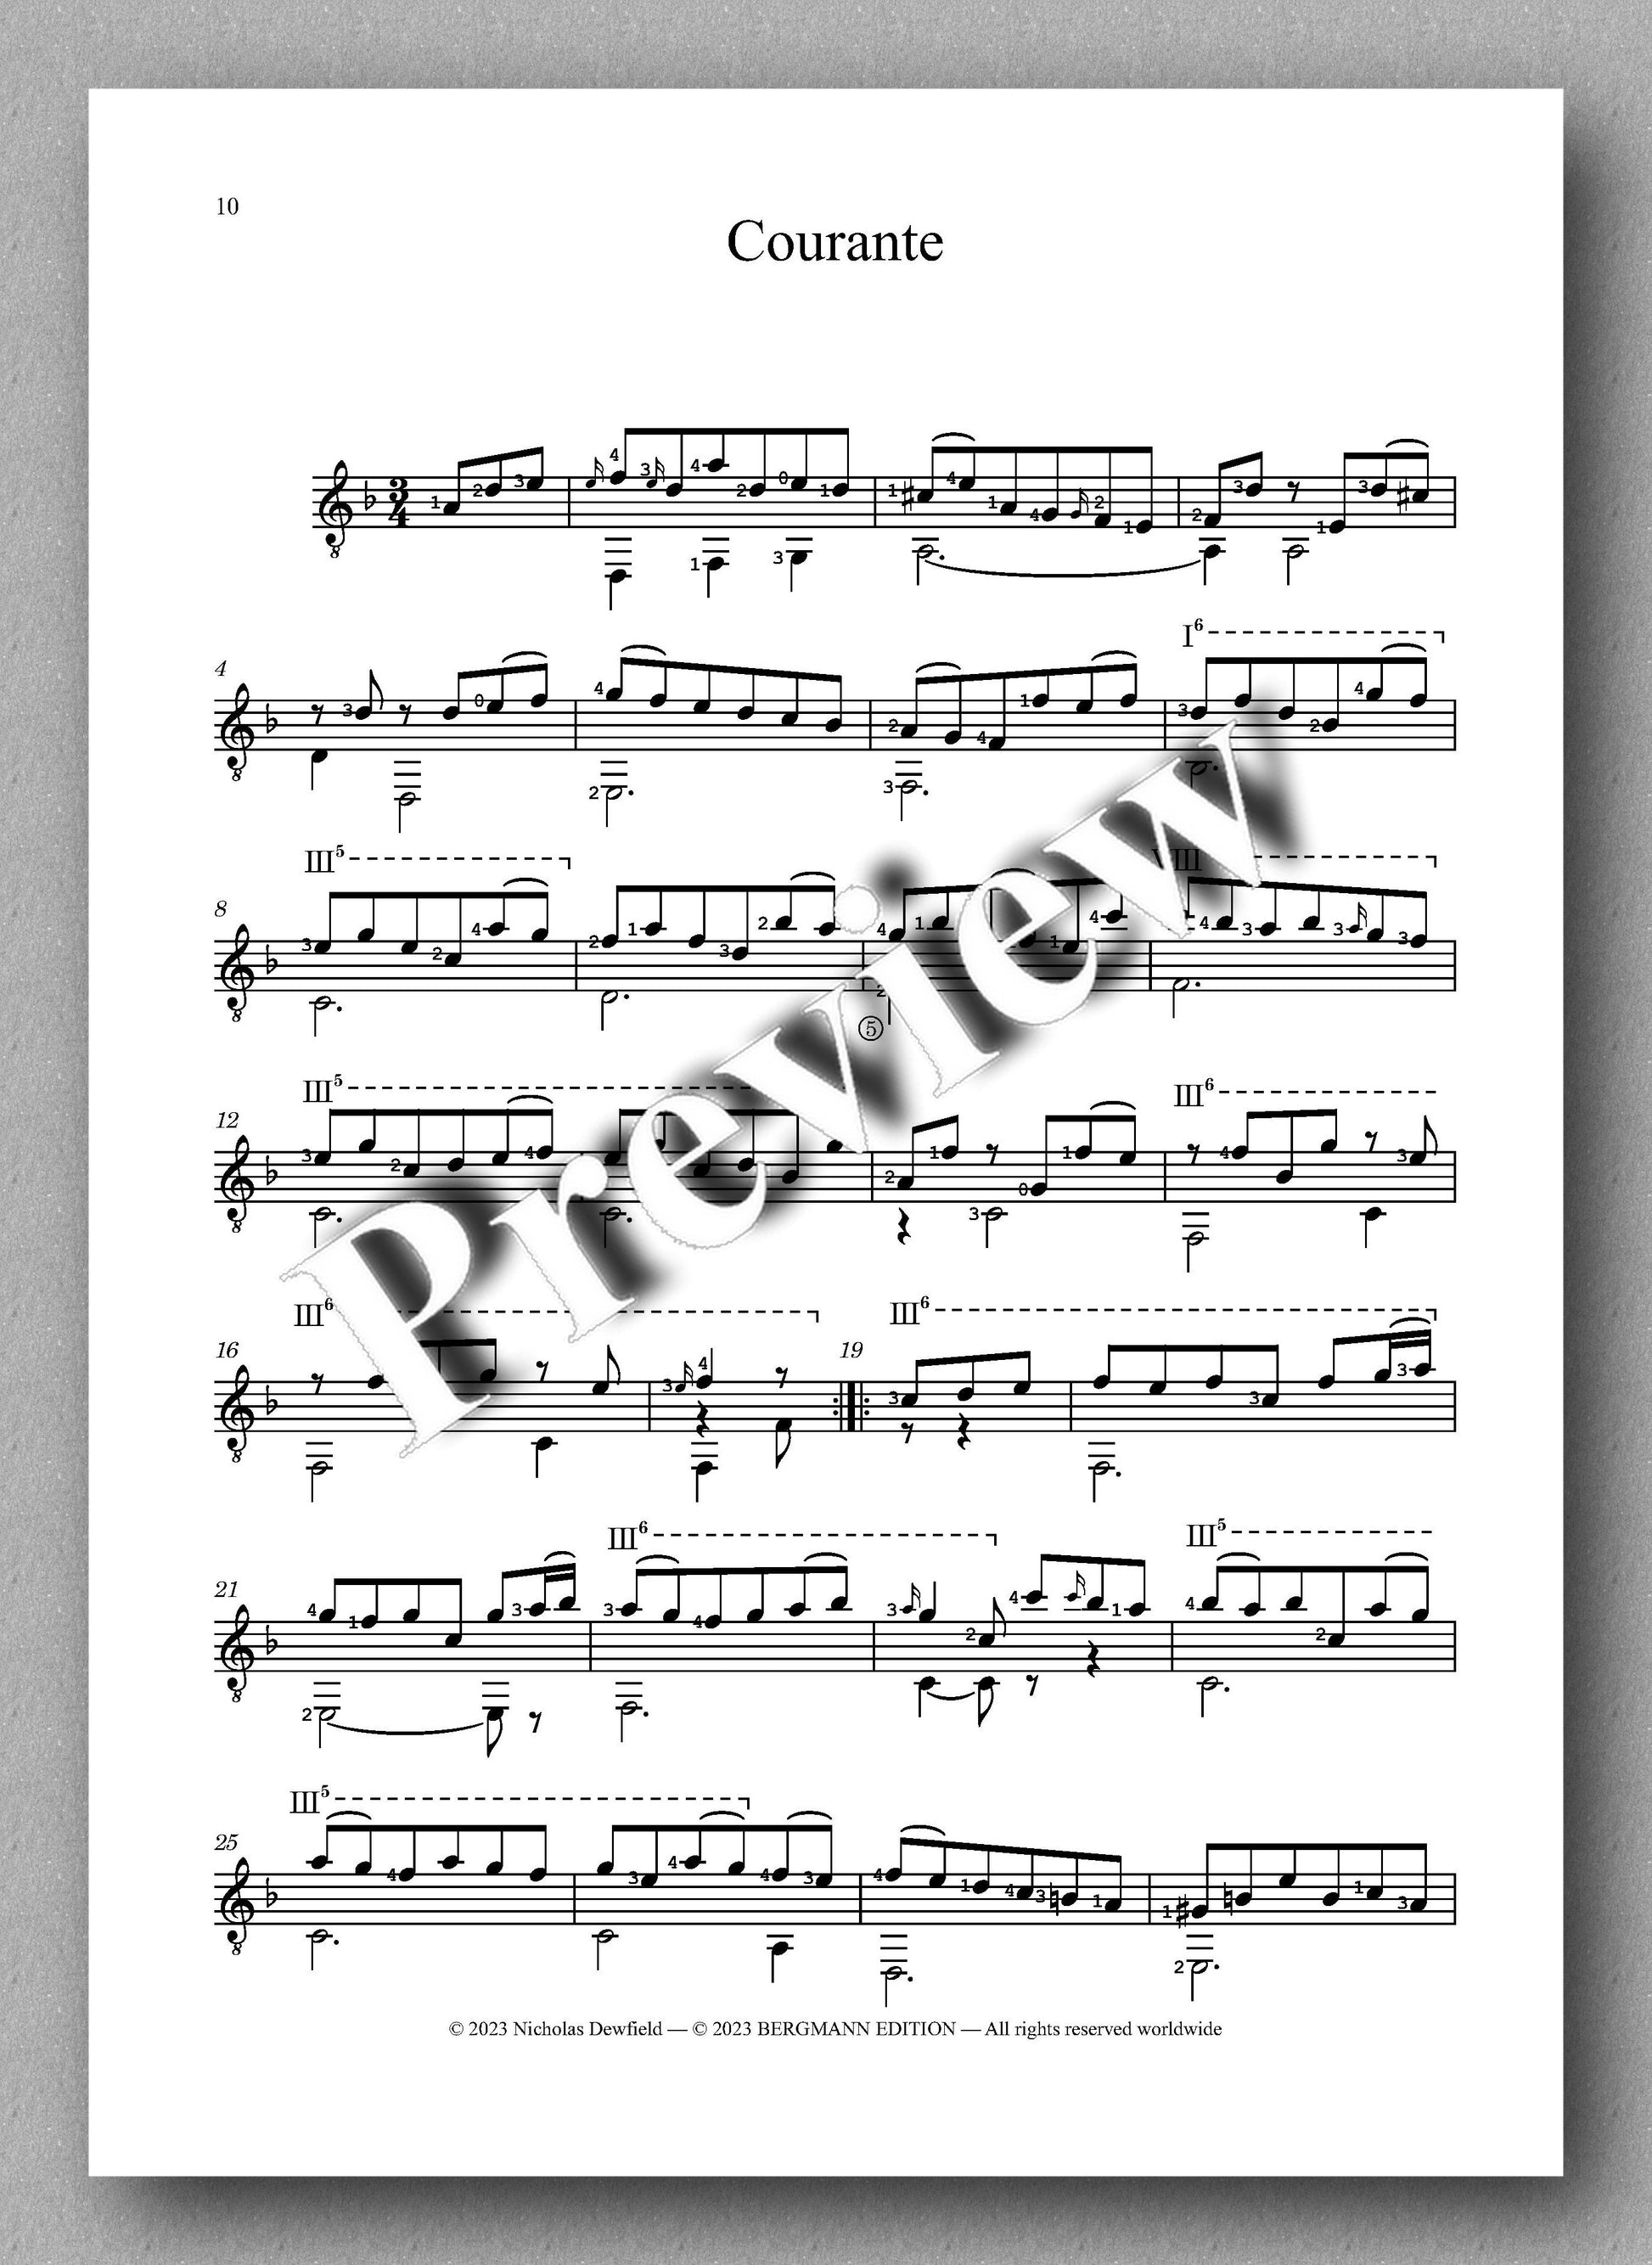 Sylvius Leopold Weiss (1687-1750), Sonata No. 13 - preview of the music score 3